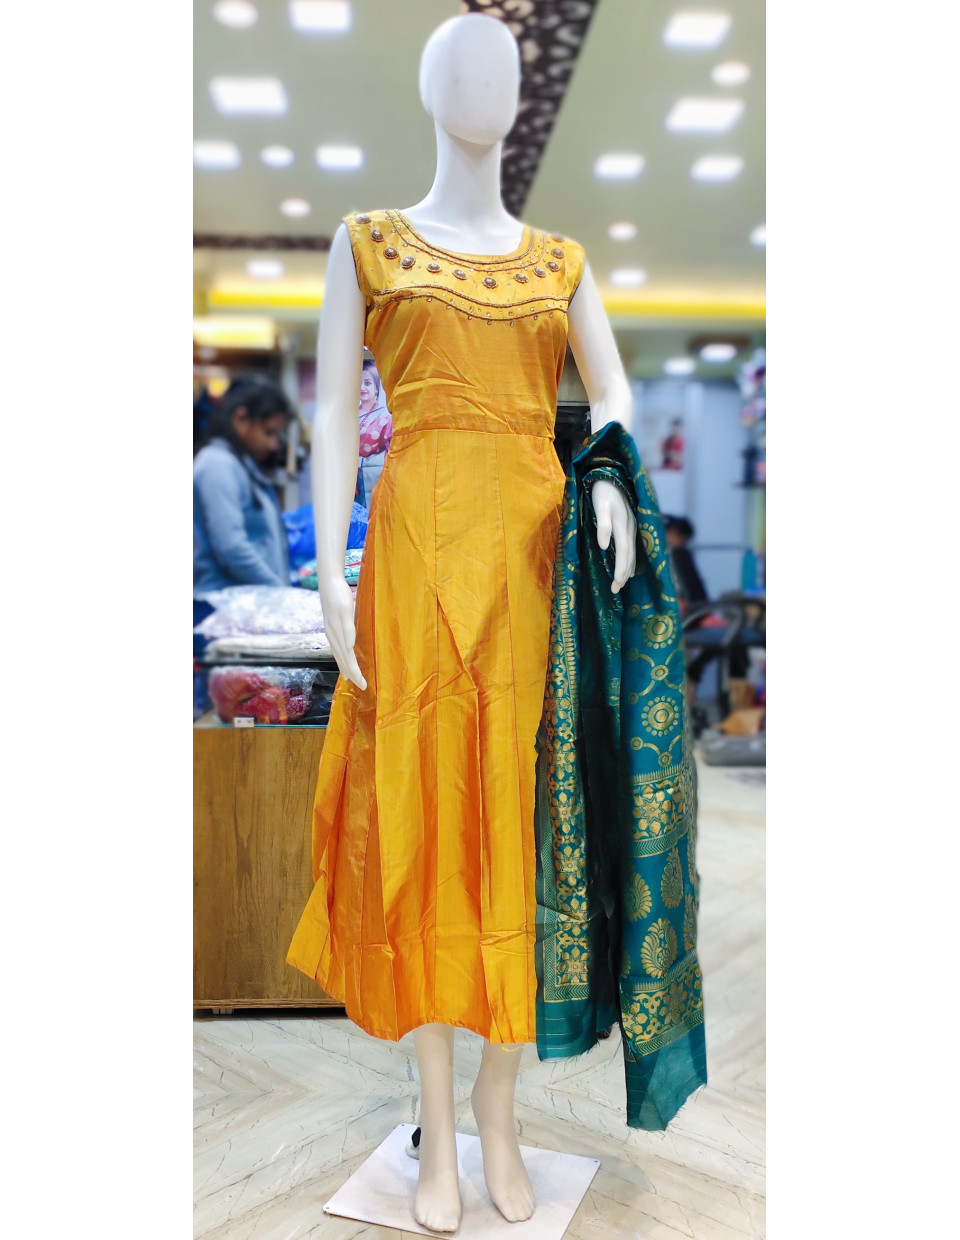 Silk Long Gown With Beads Work (KR2117)